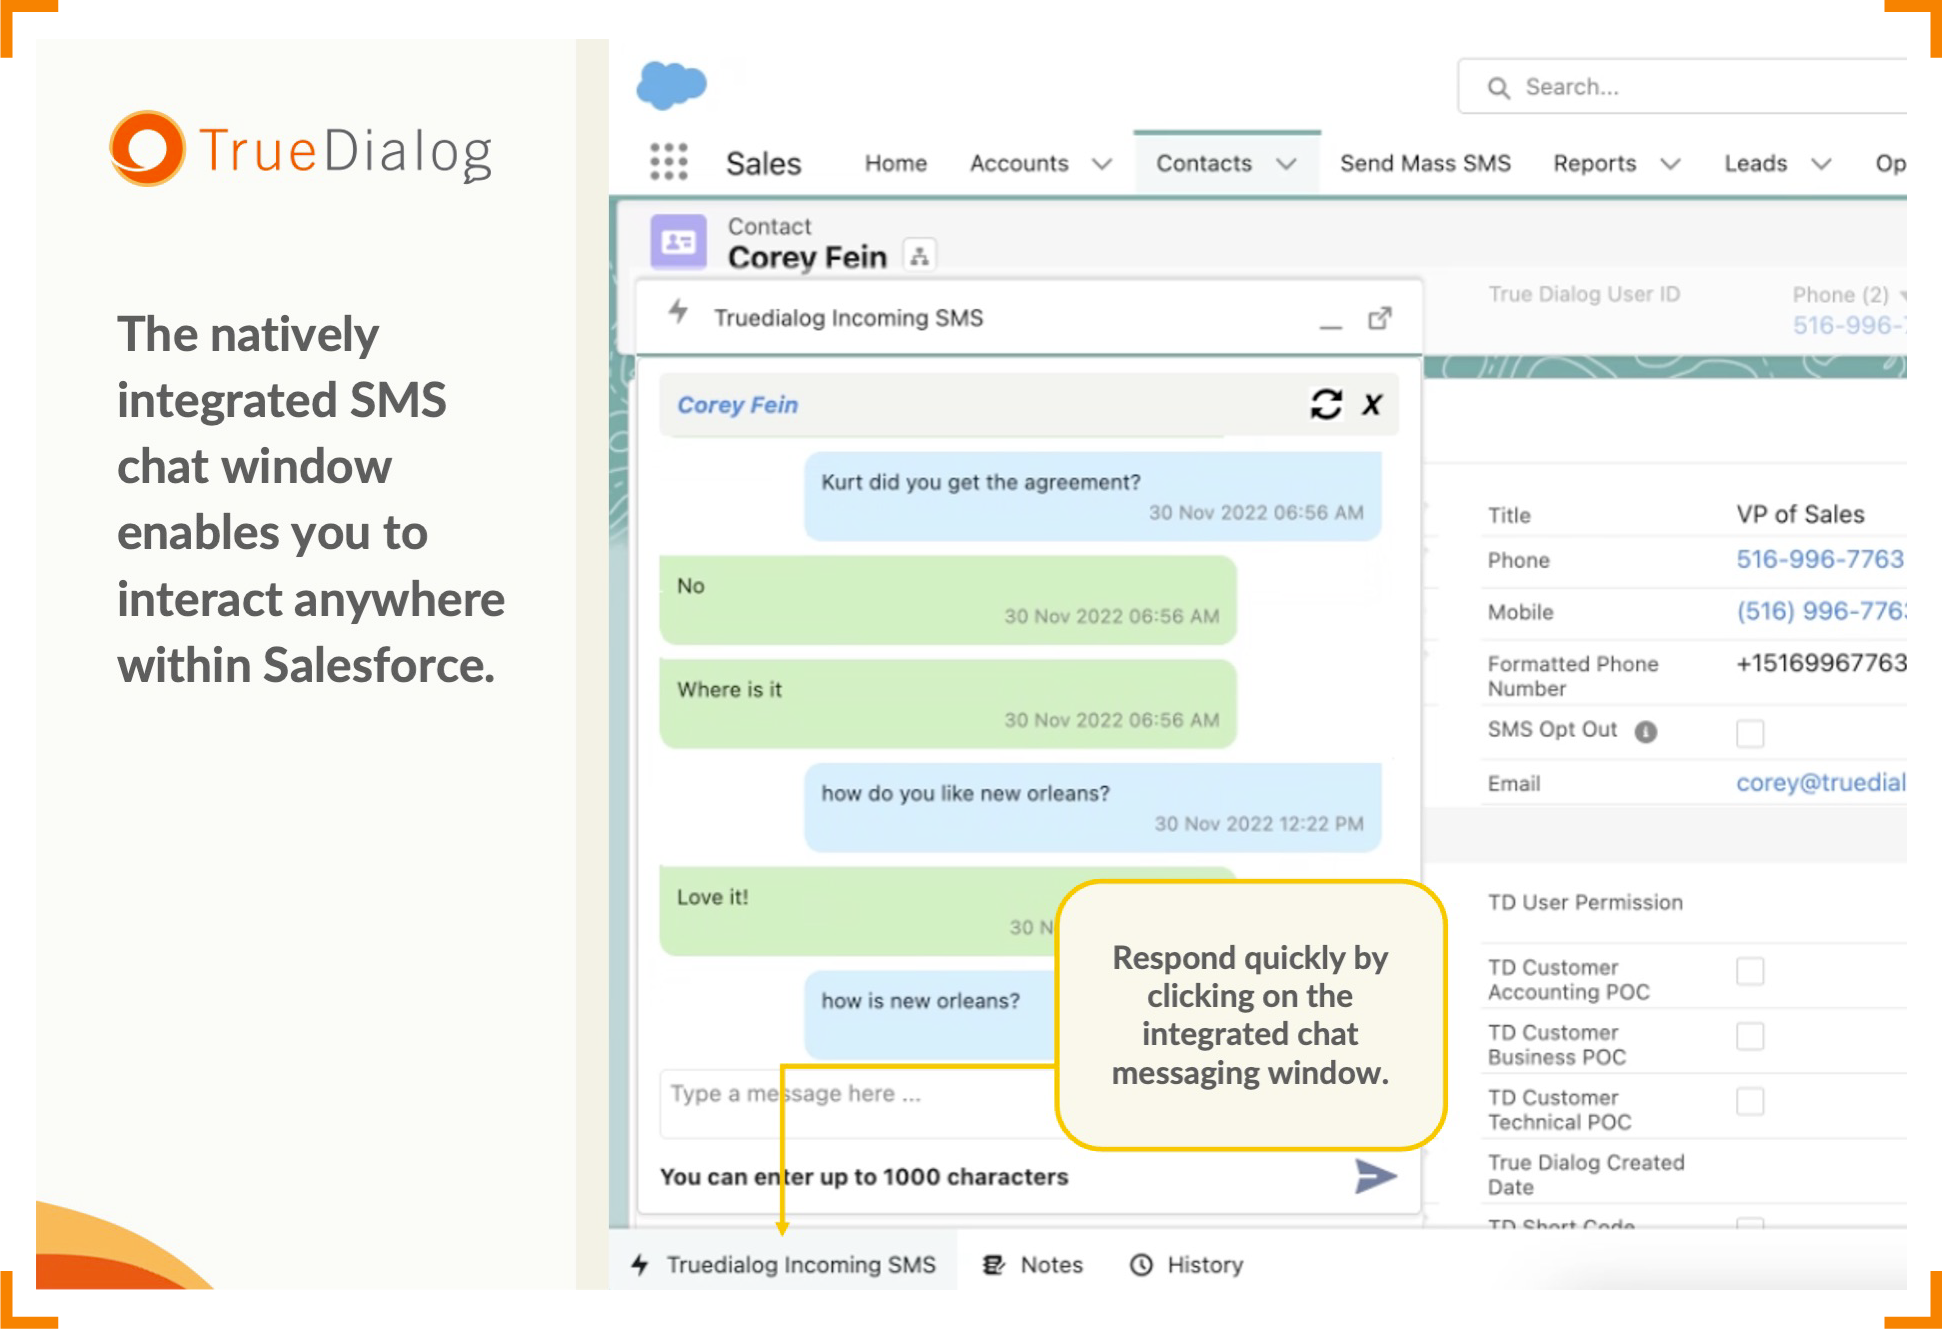 6b-The-natively-integrated-SMS-chat-window-enables-you-to-interact-anywhere-within-Salesforce